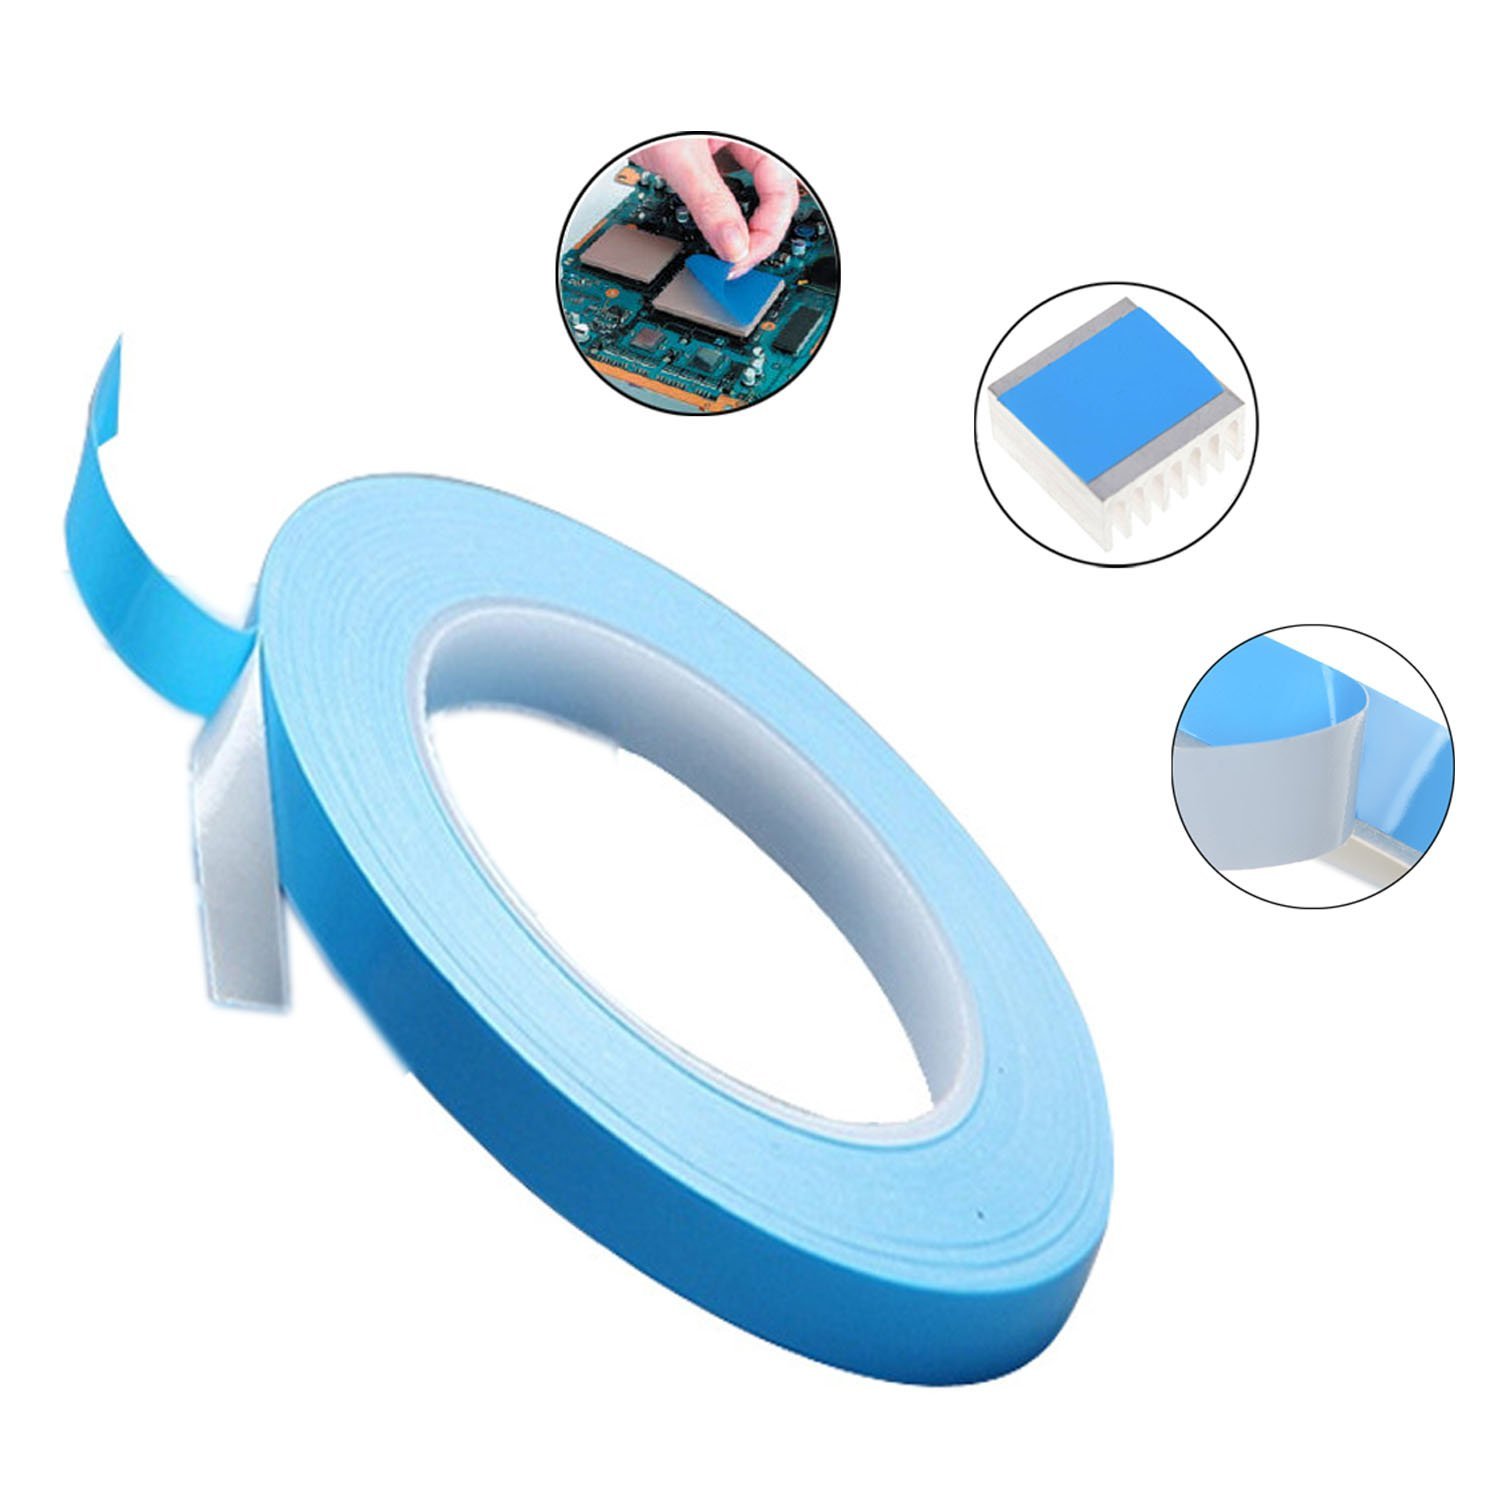 Fiberglass Thermal Conductive Tape for Heat Sink pad of LED, LCD, CPU etc Featured Image